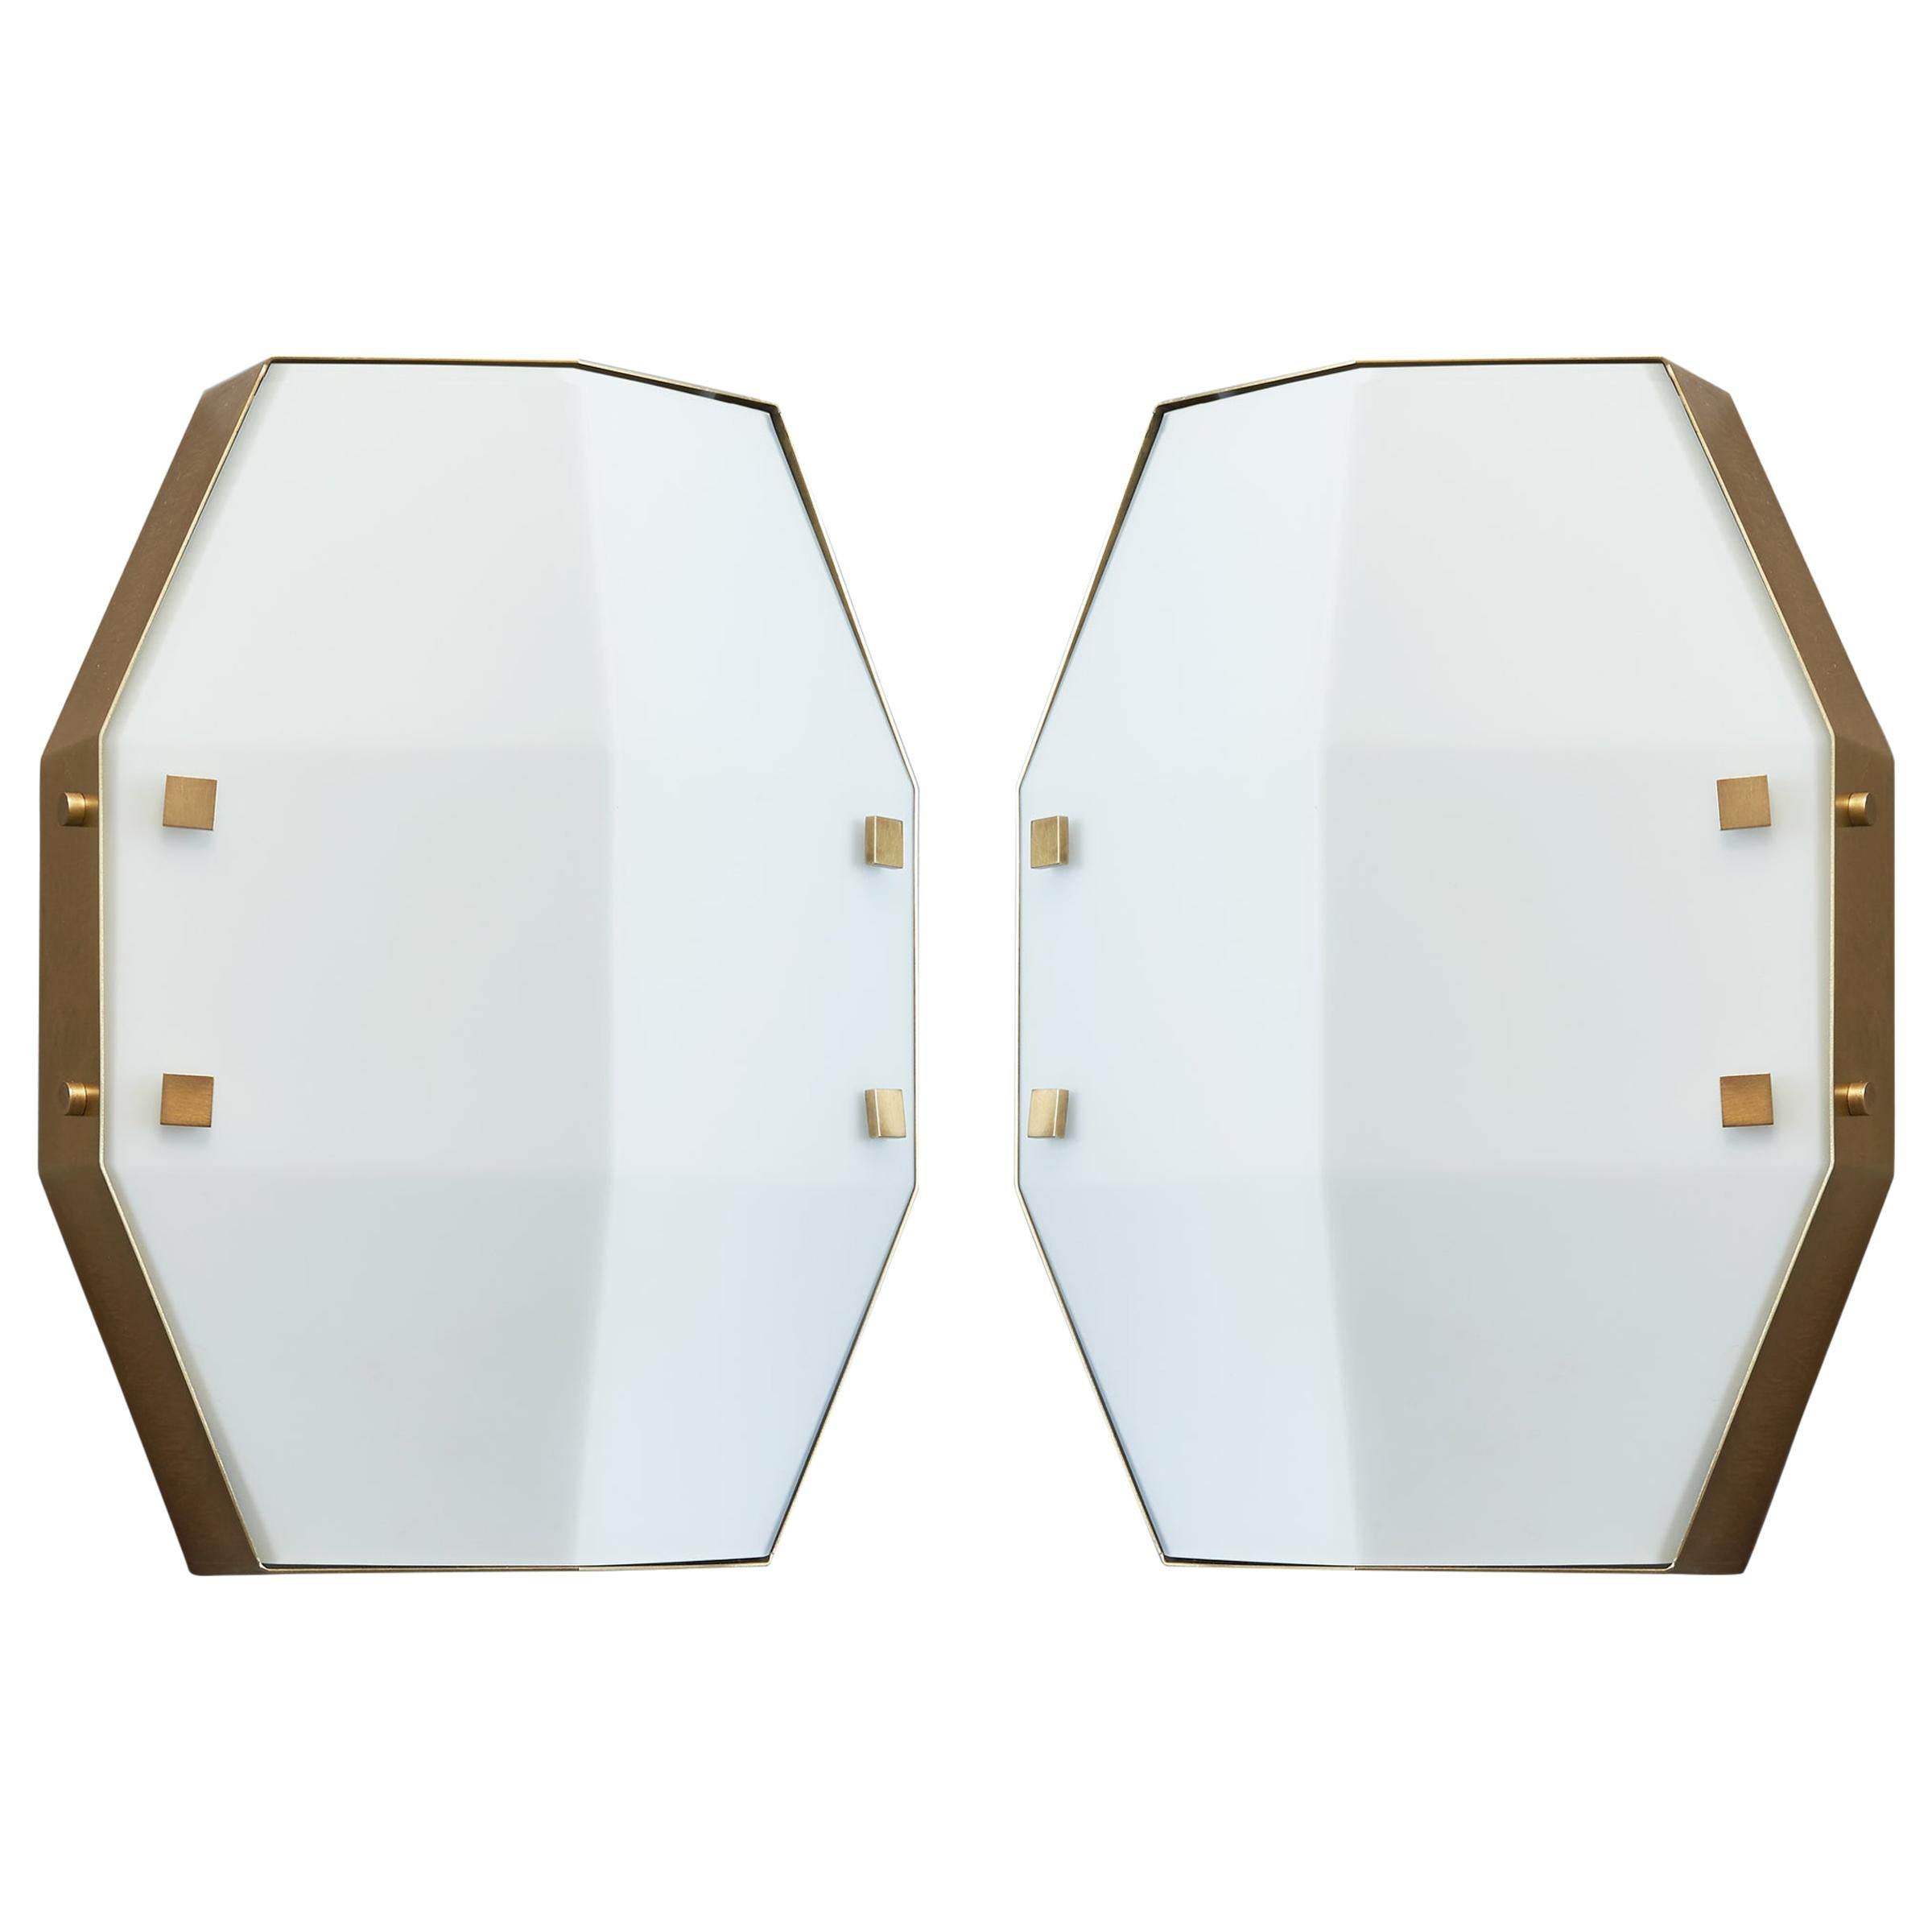  Arredoluce Pair of Sconces in Satin Opaline Glass, Italy, 1960s